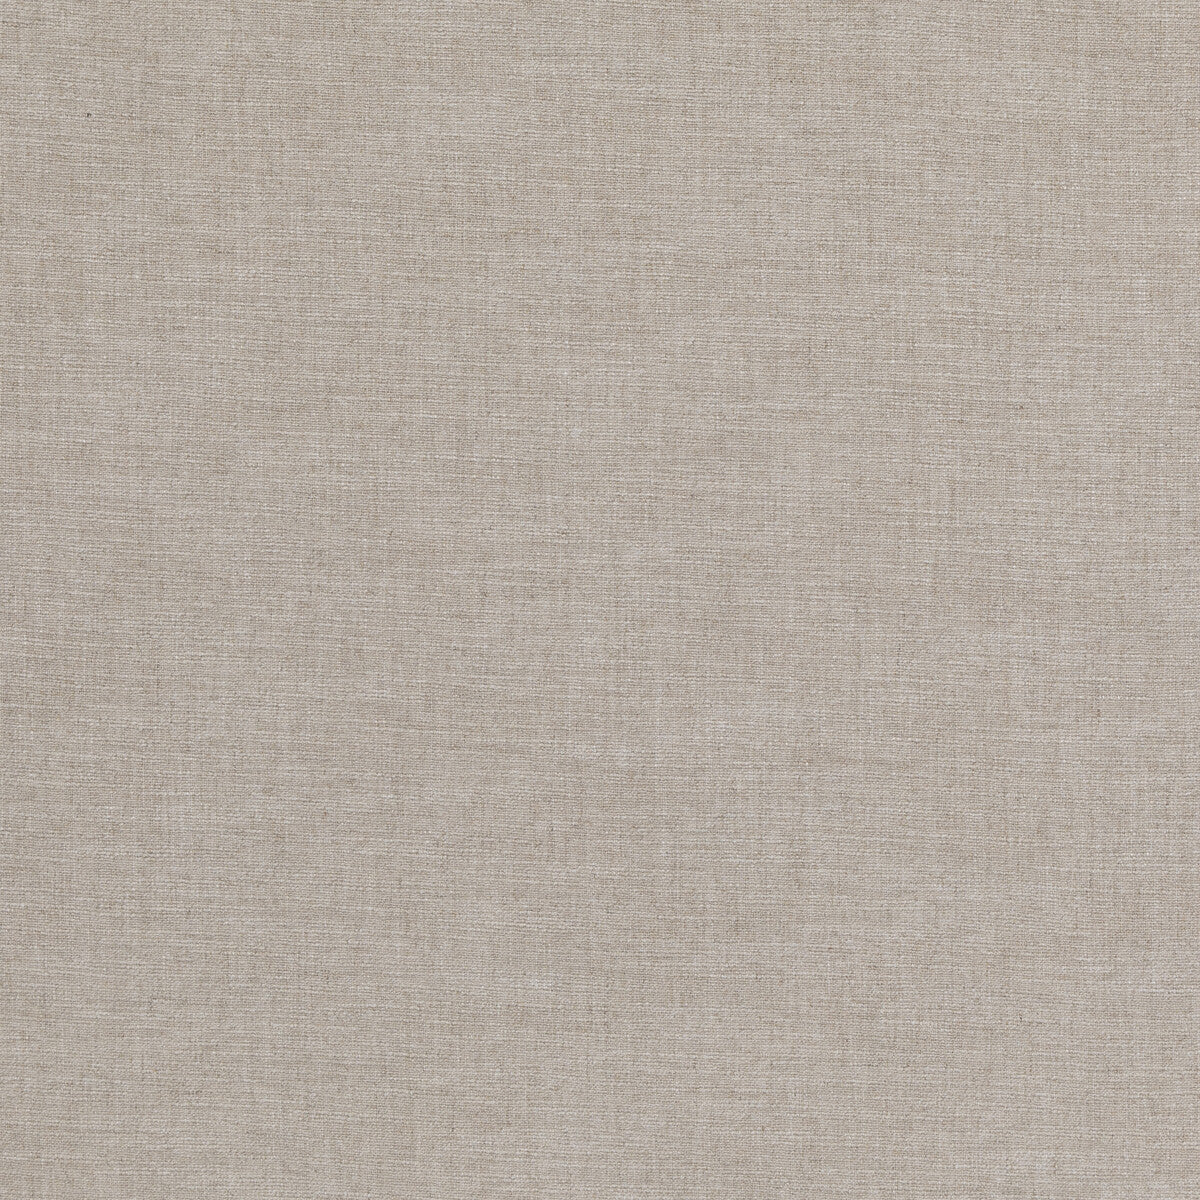 Otavi fabric in parchment color - pattern ED85372.225.0 - by Threads in the Quintessential Textures collection